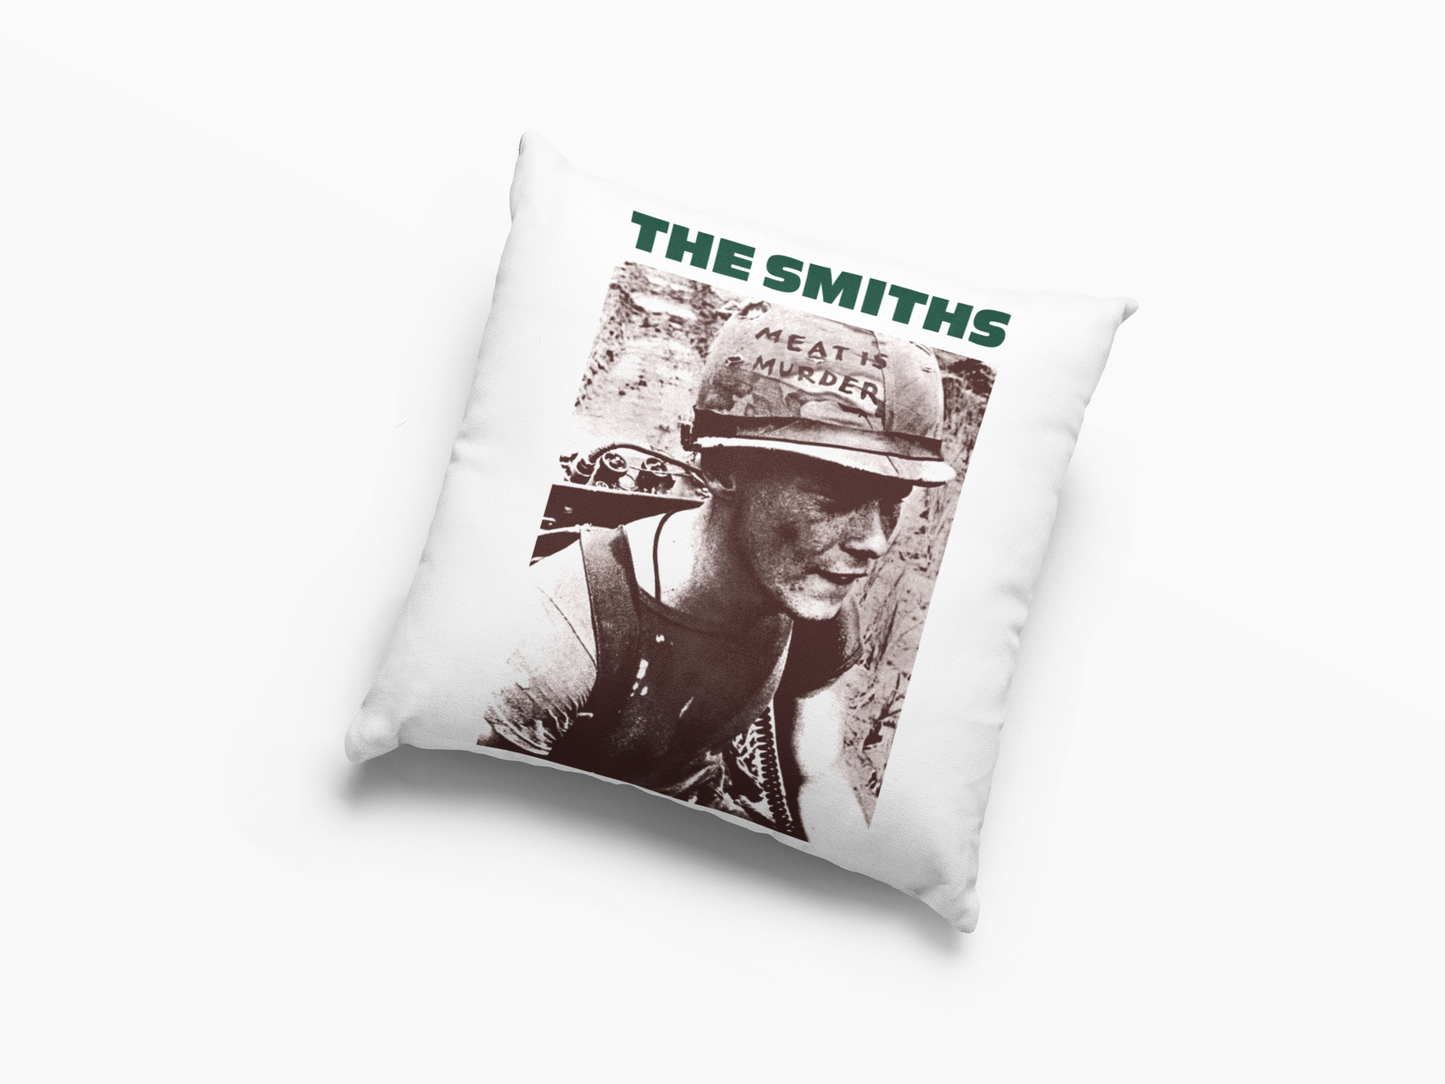 The Smiths Meat is Murder Cushion Case / Pillow Case